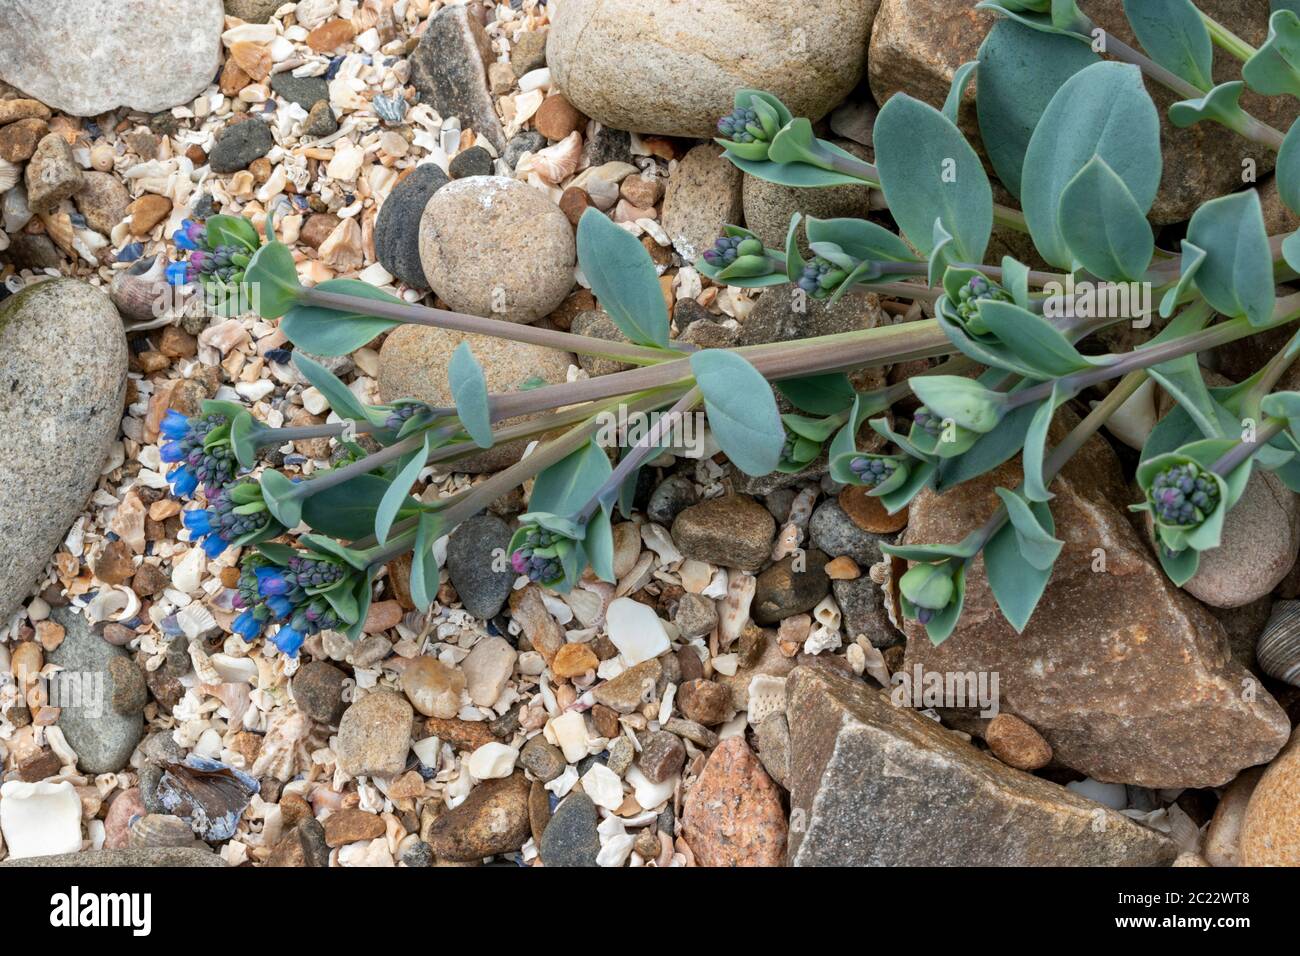 OYSTERPLANT Mertensia maritima A BLUE GREEN PLANT WITH A STEM OF BRIGHT BLUE FLOWERS ON A SEASHELL AND ROCK BEACH OF THE MORAY COAST SCOTLAND Stock Photo